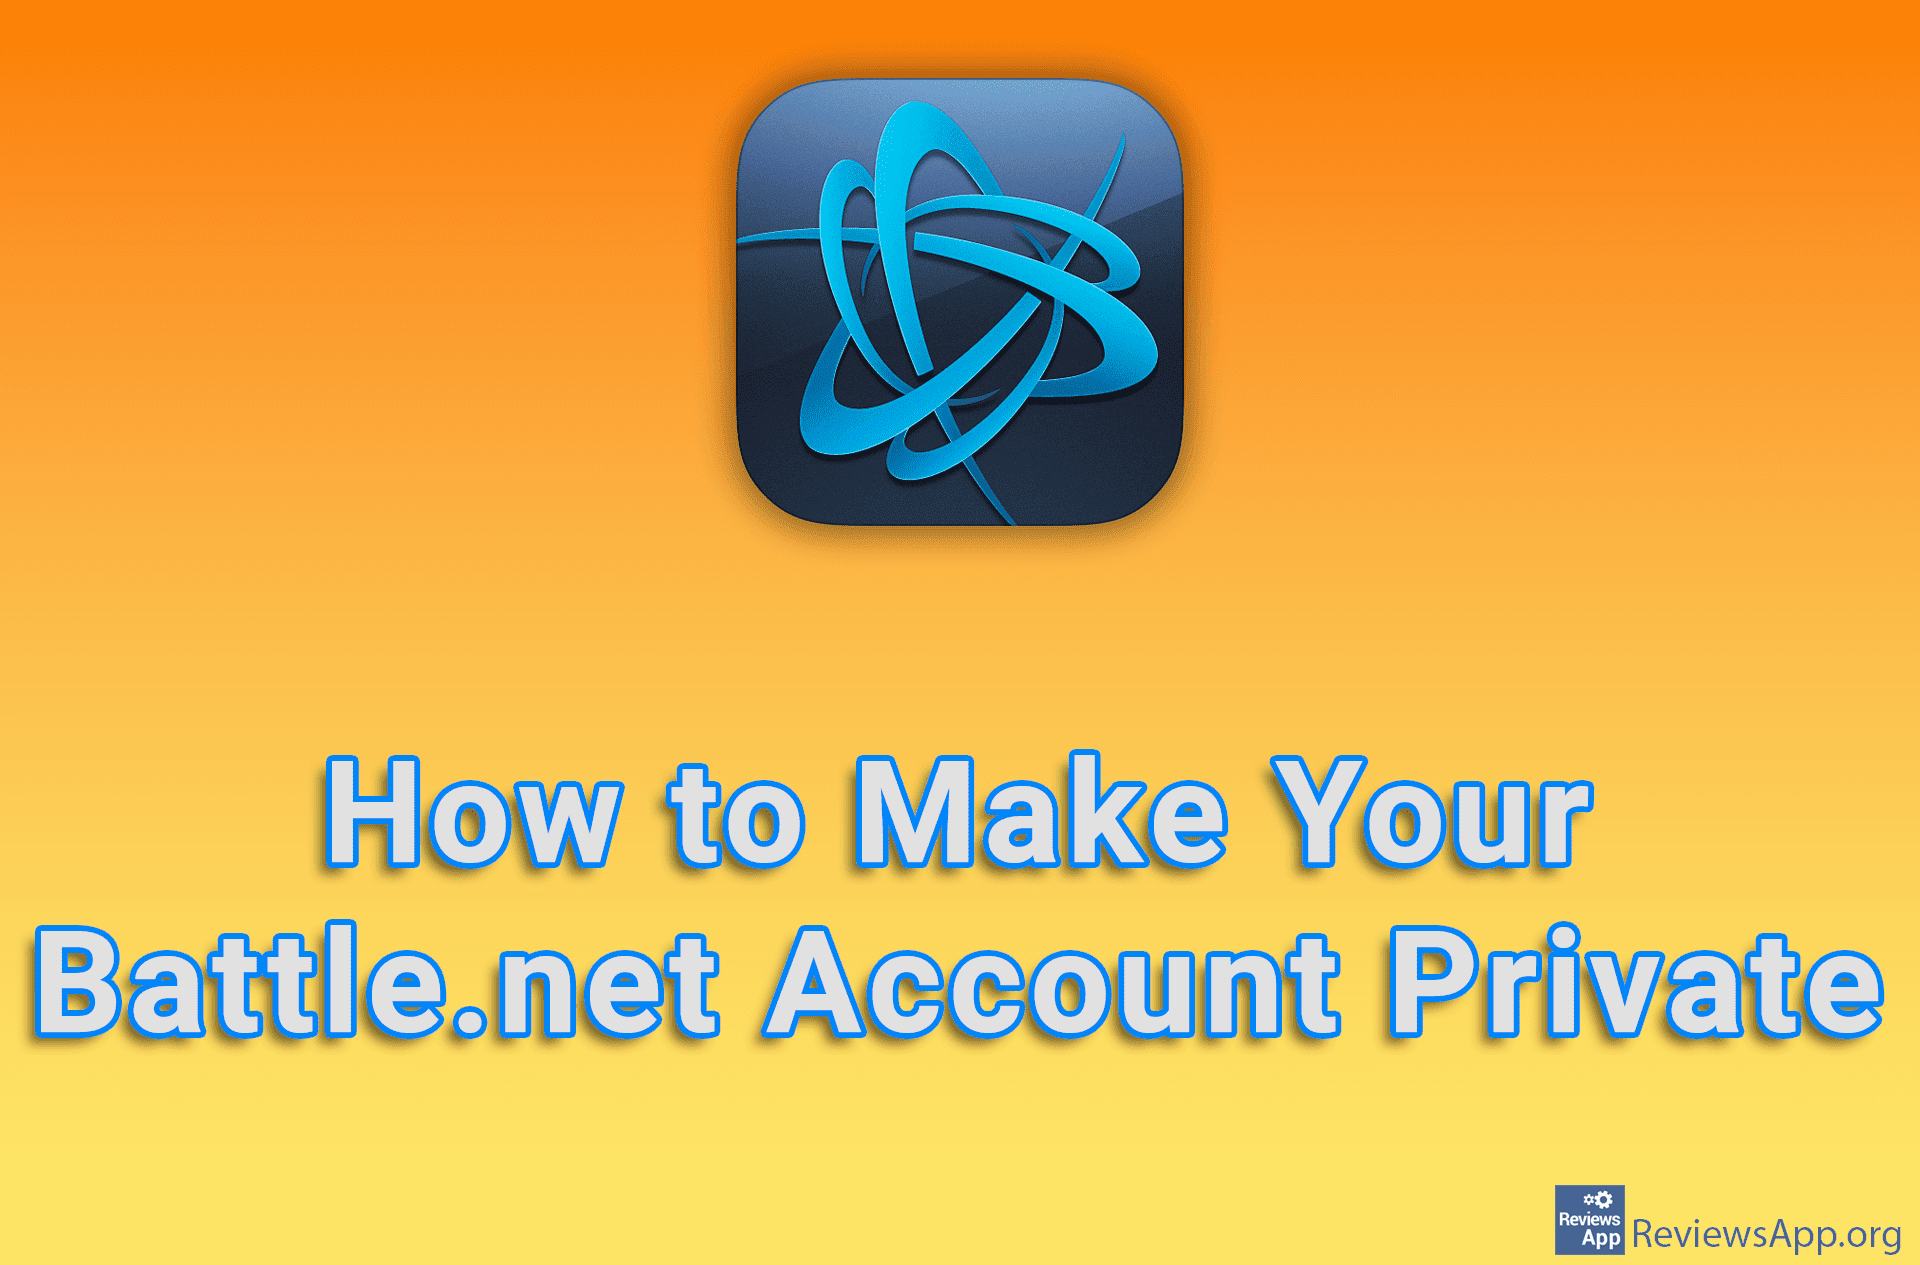 How to Make Your Battle.net Account Private